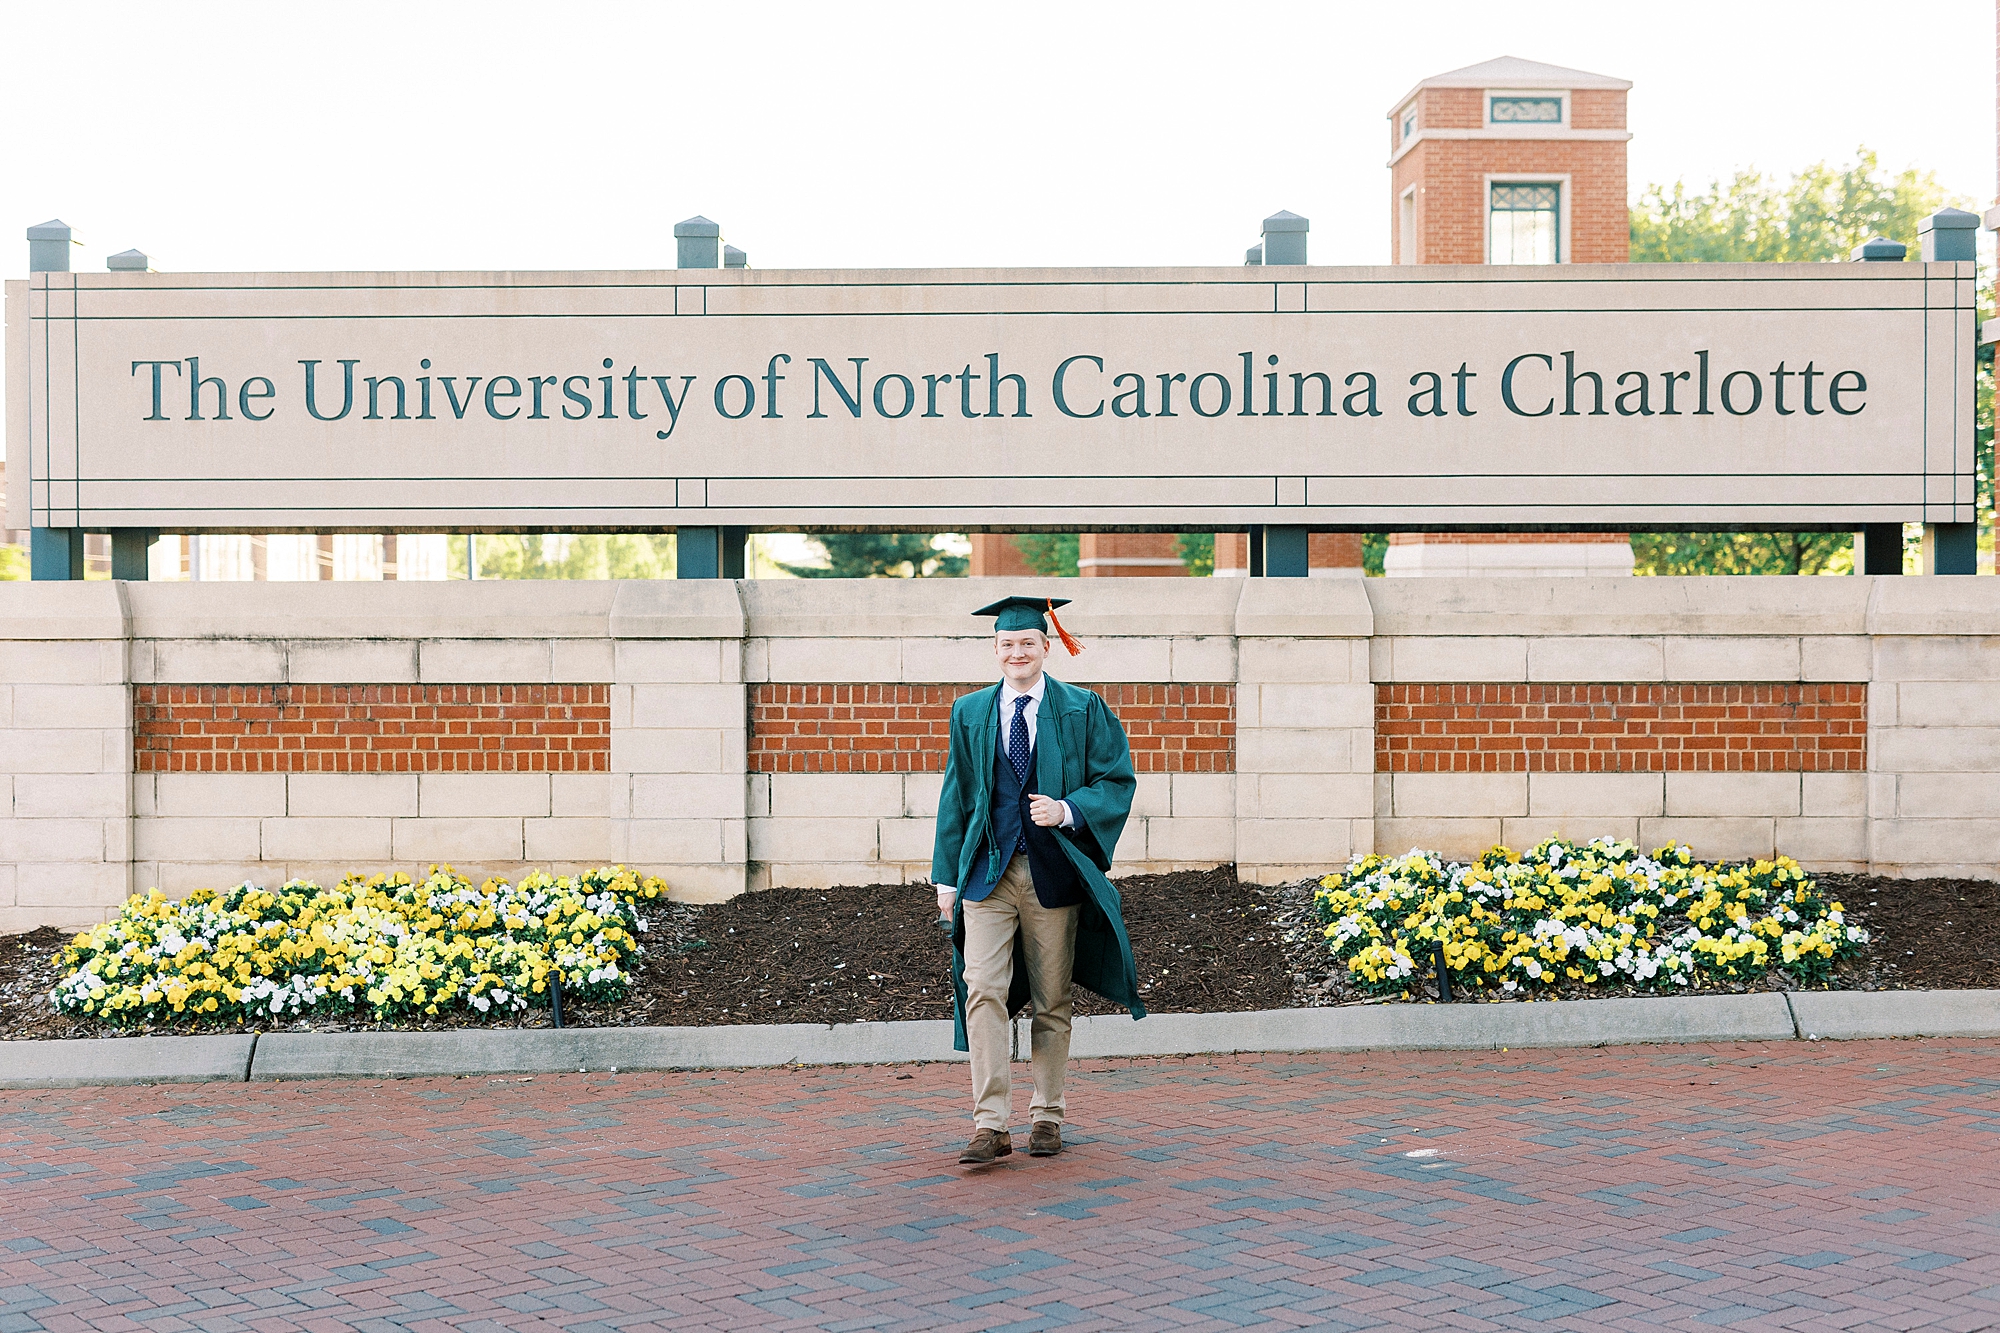 senior in green cap and gown walks in front of University of North Carolina at Charlotte sign